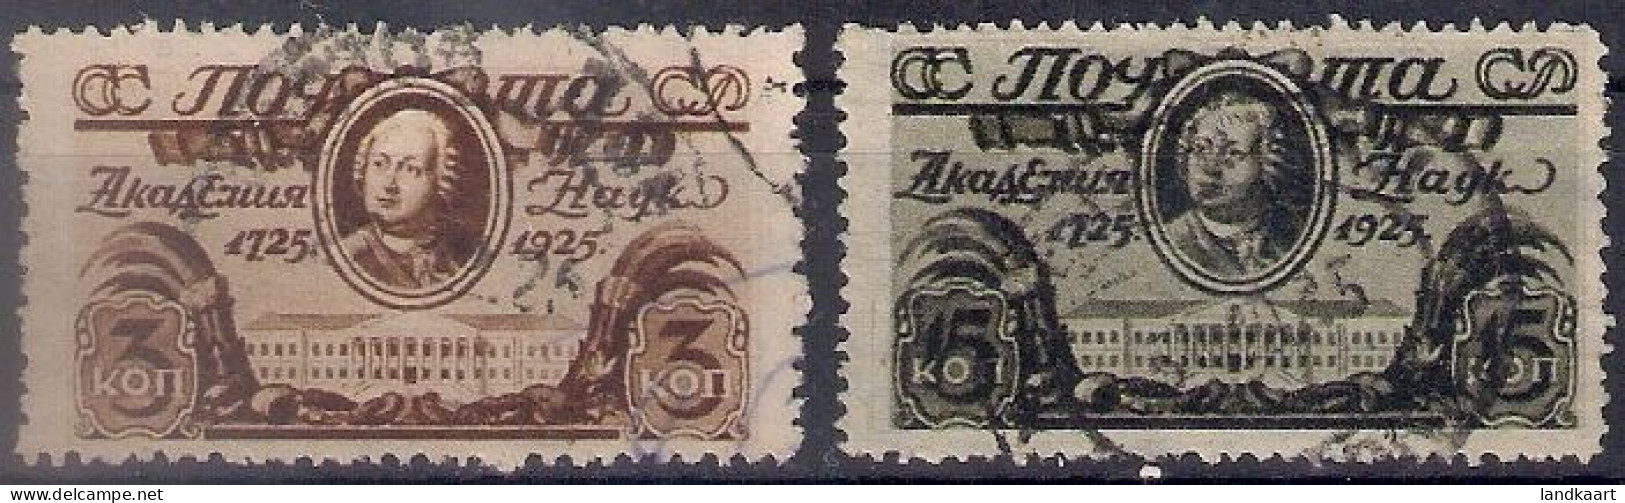 Russia 1925, Michel Nr 298-99, Used - Usados